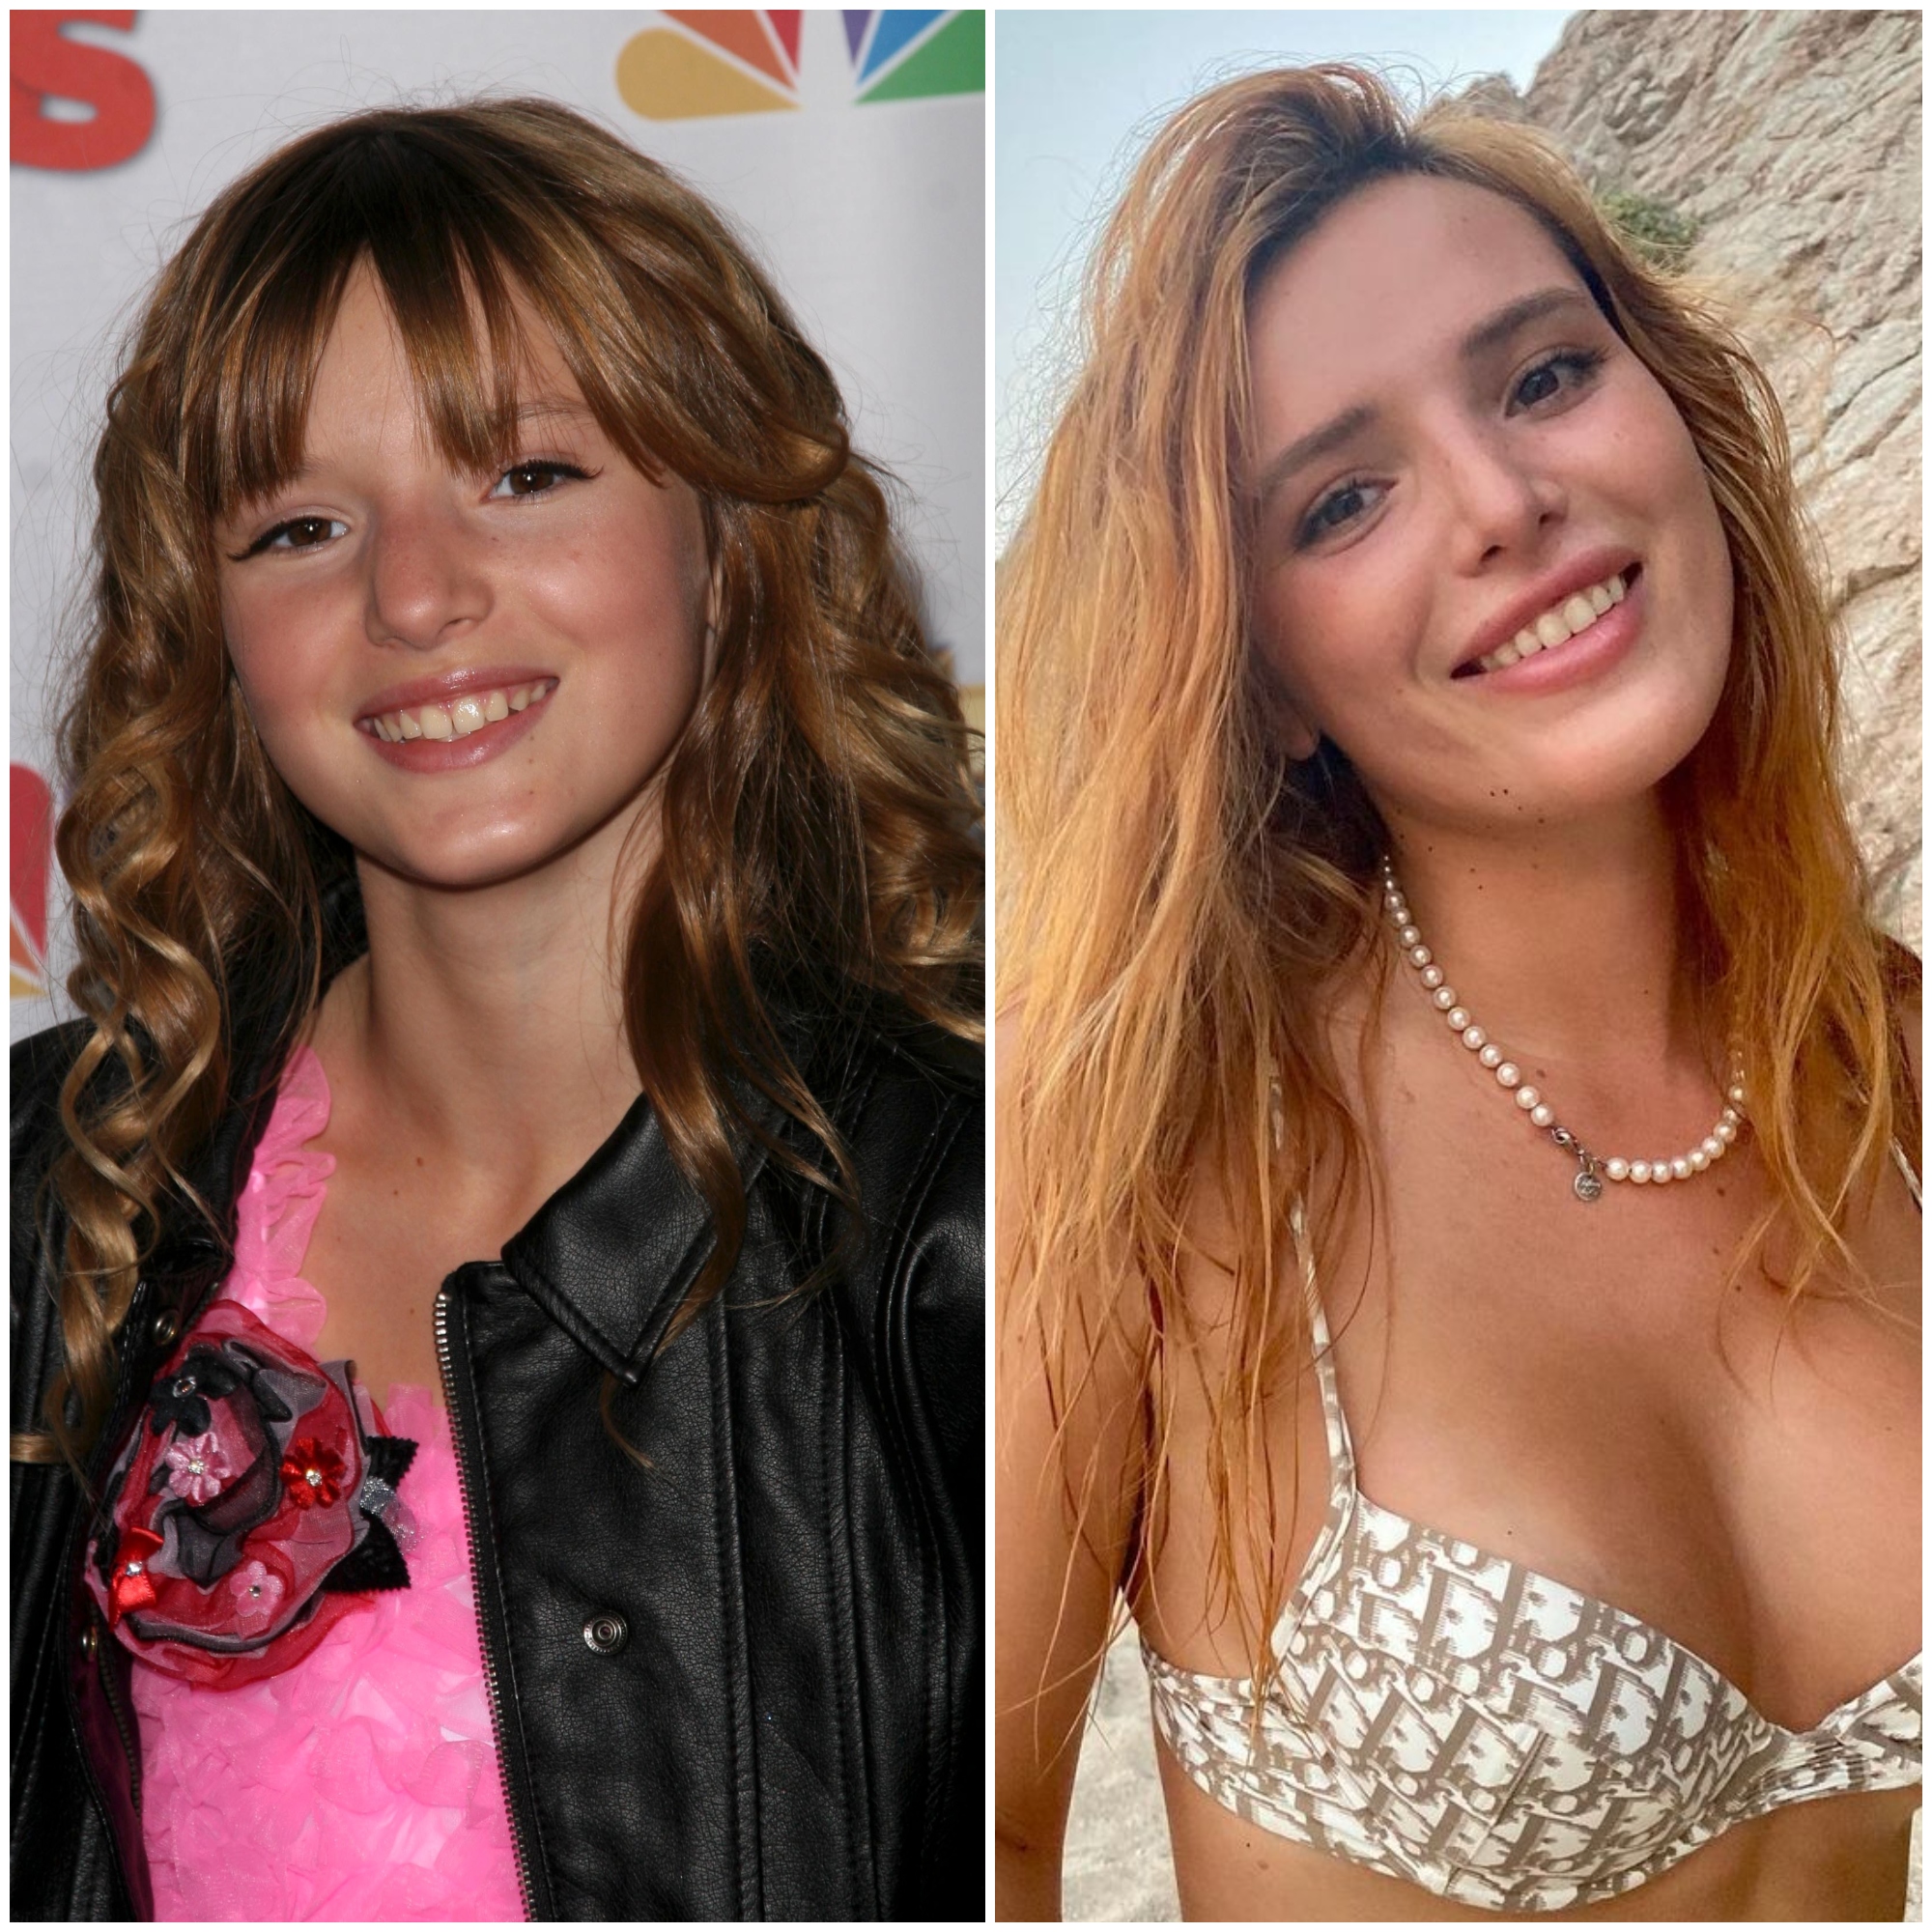 Bella Thorne Thong Upskirt - Bella Thorne Young to Now: See the Actress' Complete Transformation